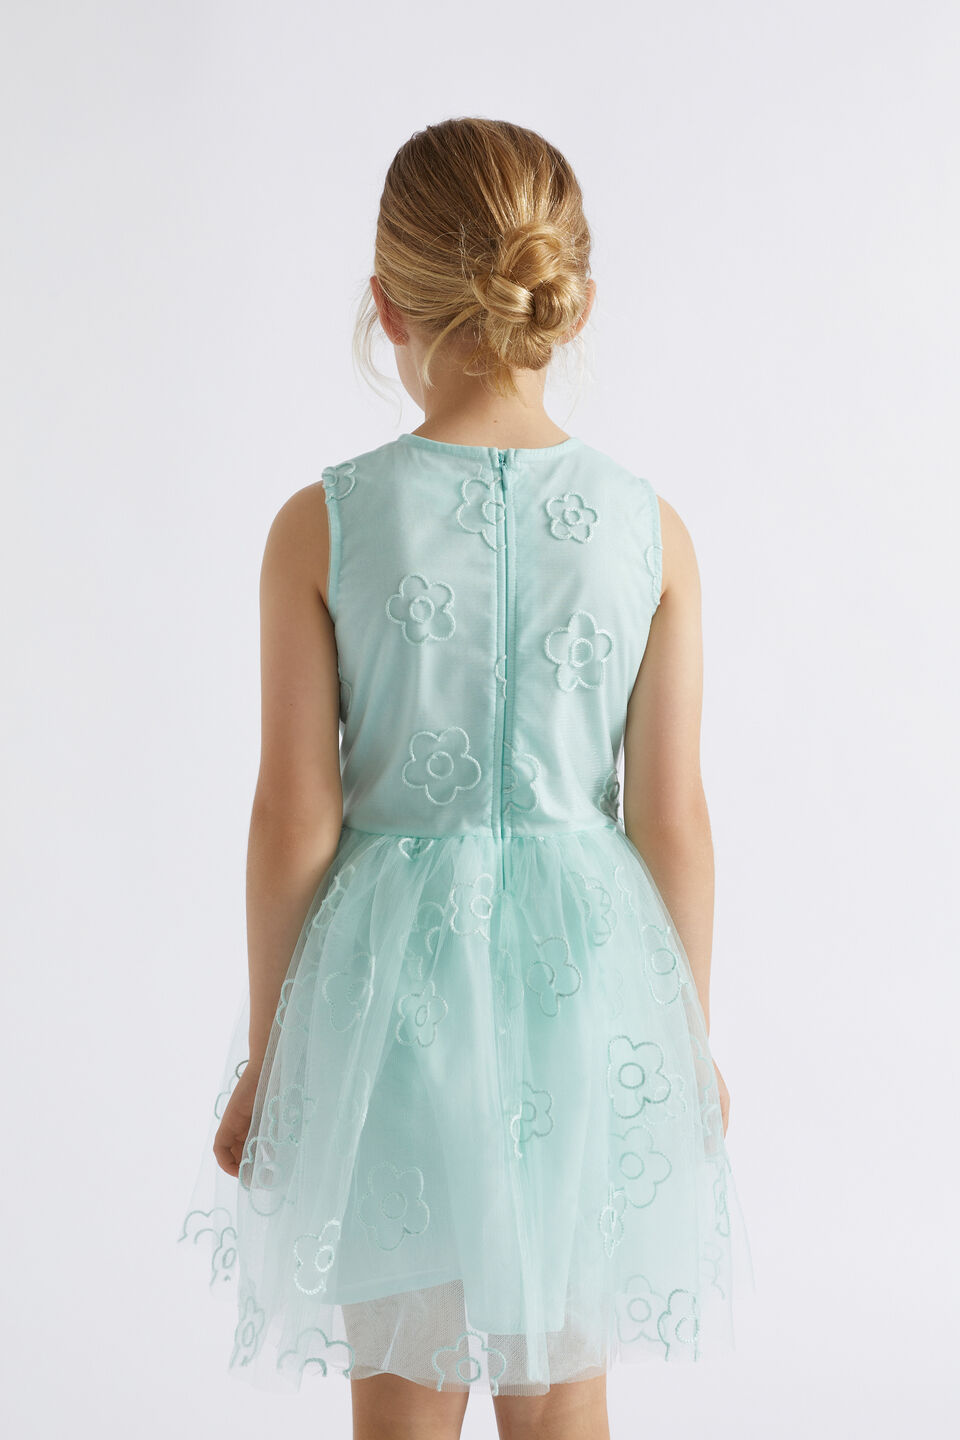 Daisy Embroidered Dress  Mint